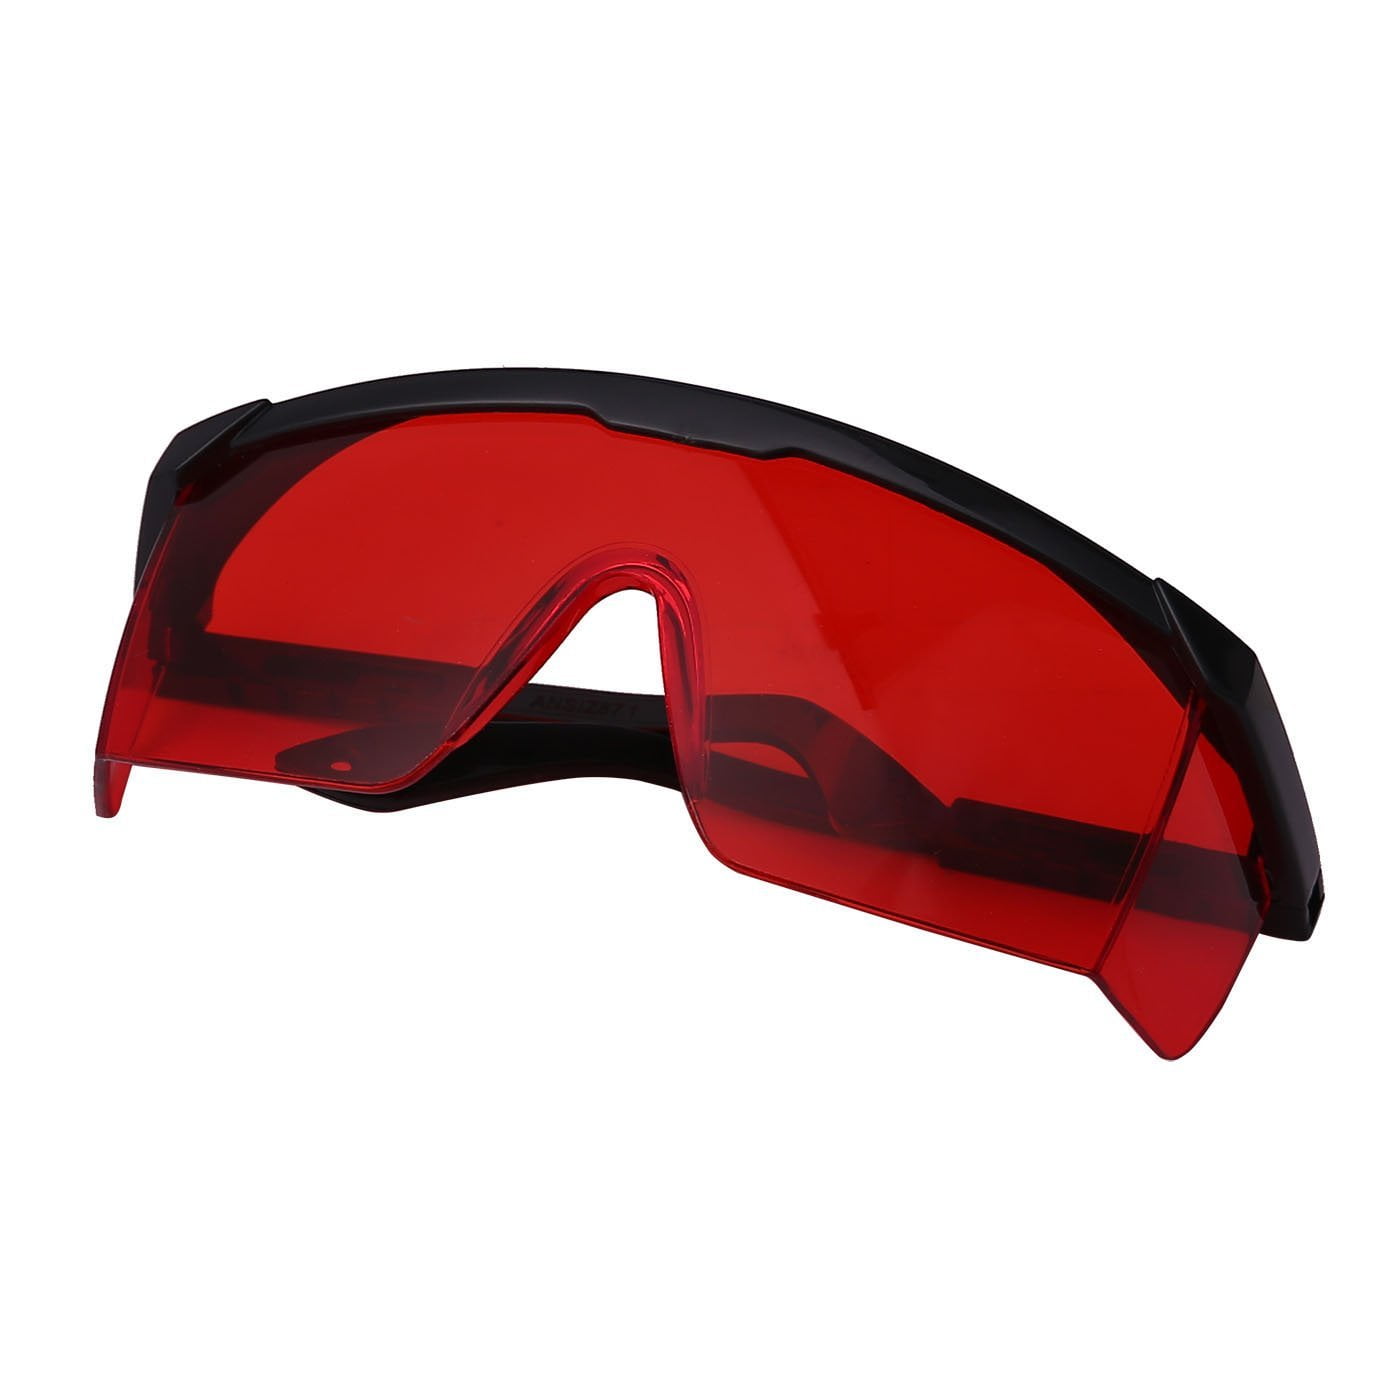 Blue Laser Eye Protection Safety Glasses Goggles for UV Lasers Details about   USA Green Red 